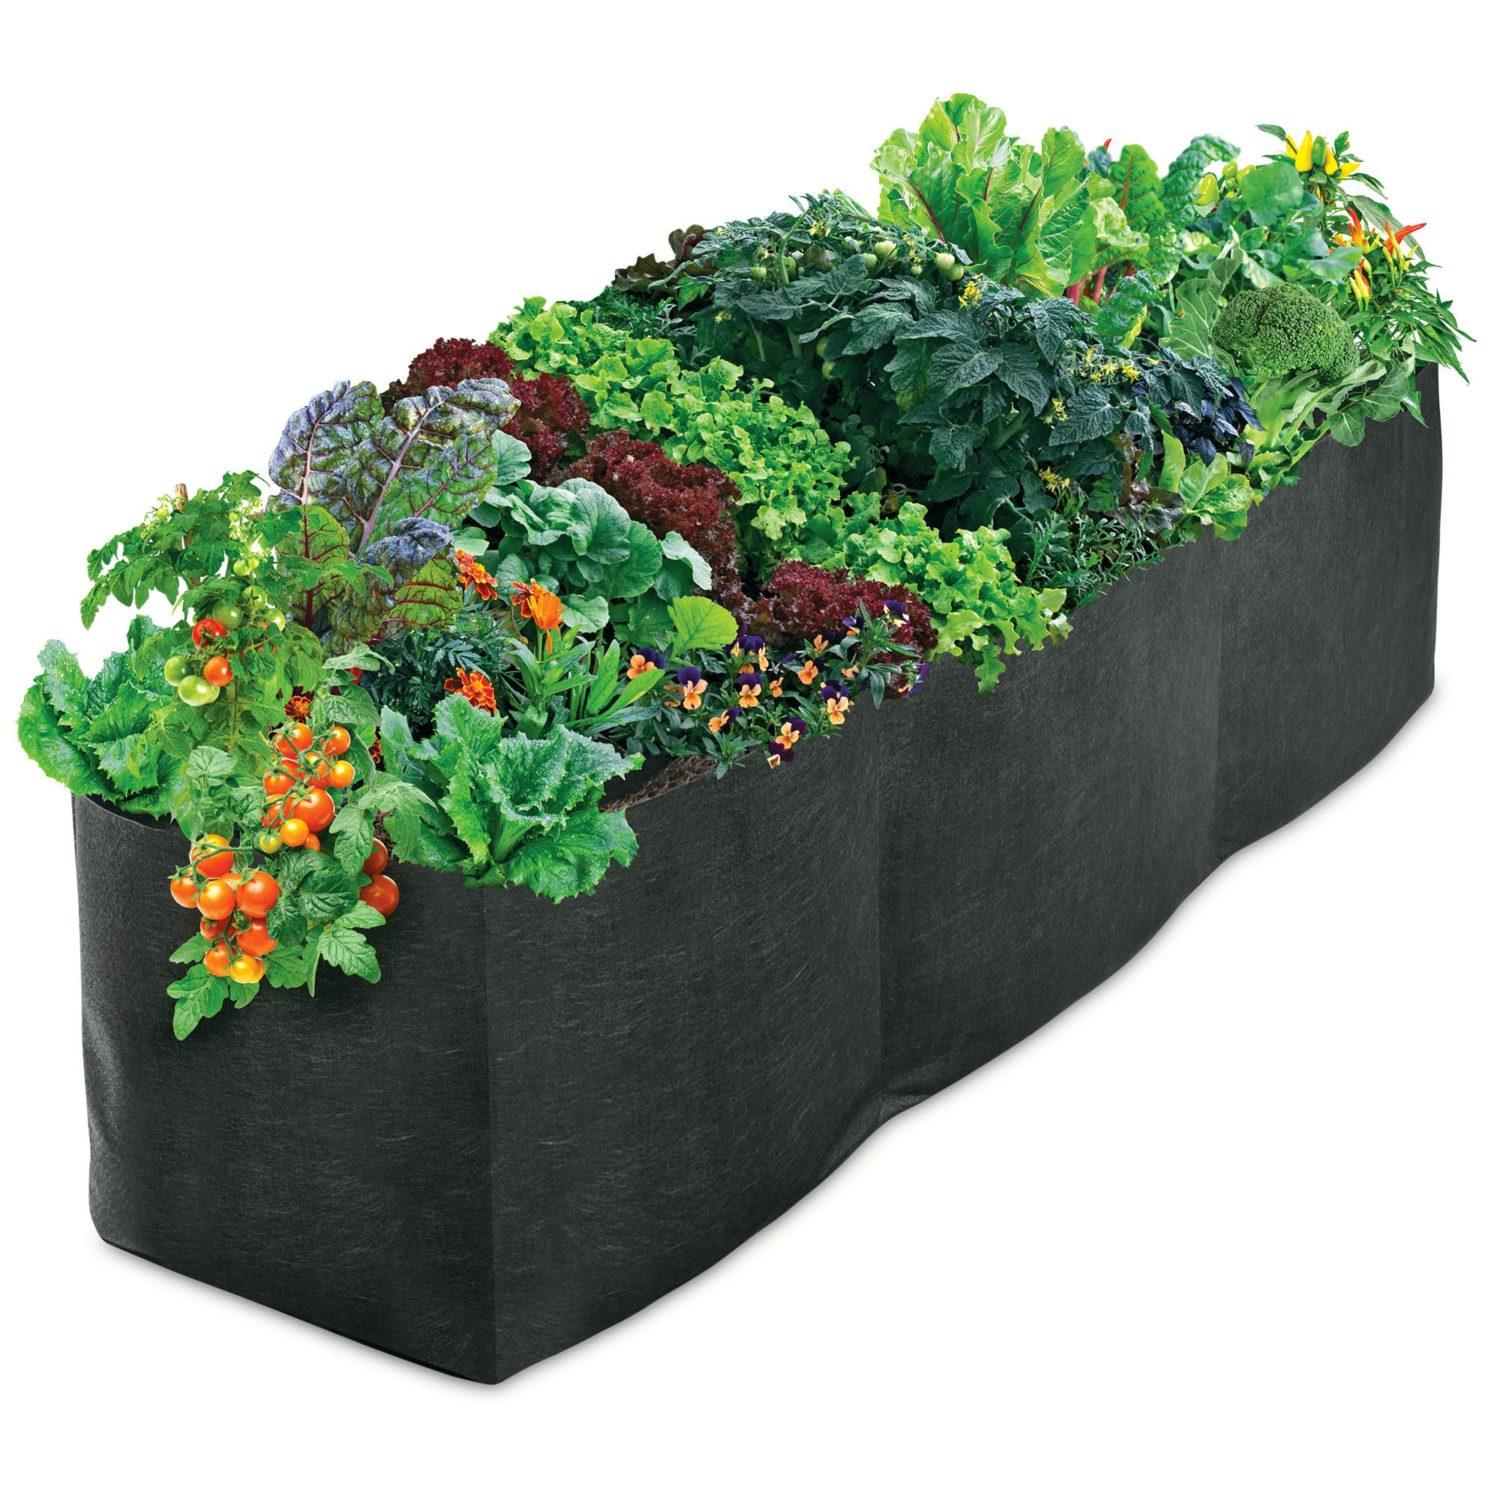 DAMEING Fabric Raised Garden Bed Rectangle Planter Grow Bags Smart Bed Plant Pot for Herb Flower Vegetable Plants 6 x 3ft 